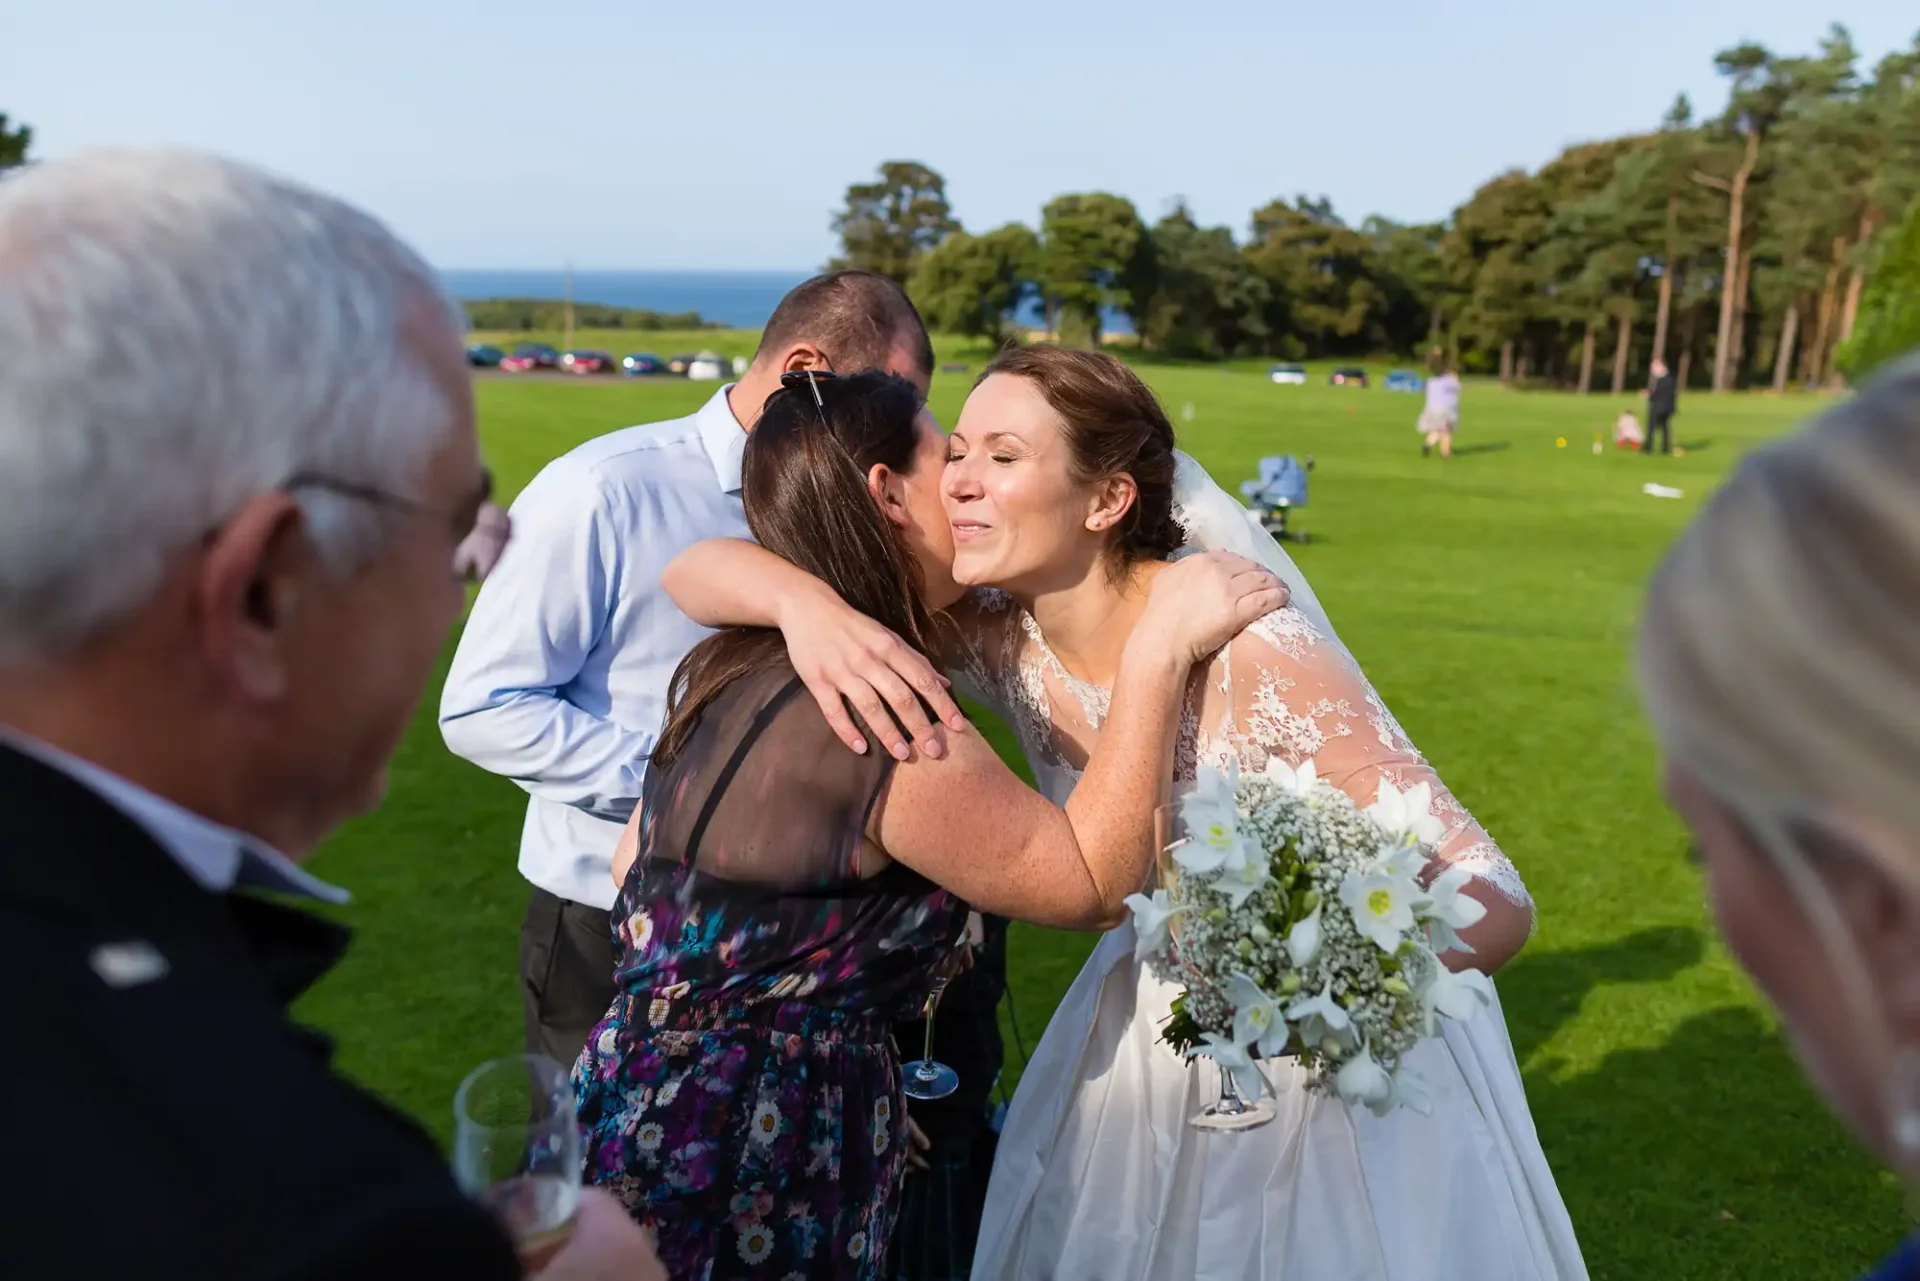 A bride in a white dress hugs a woman in a floral dress, receiving a kiss on the cheek, with guests around them at an outdoor wedding setting.